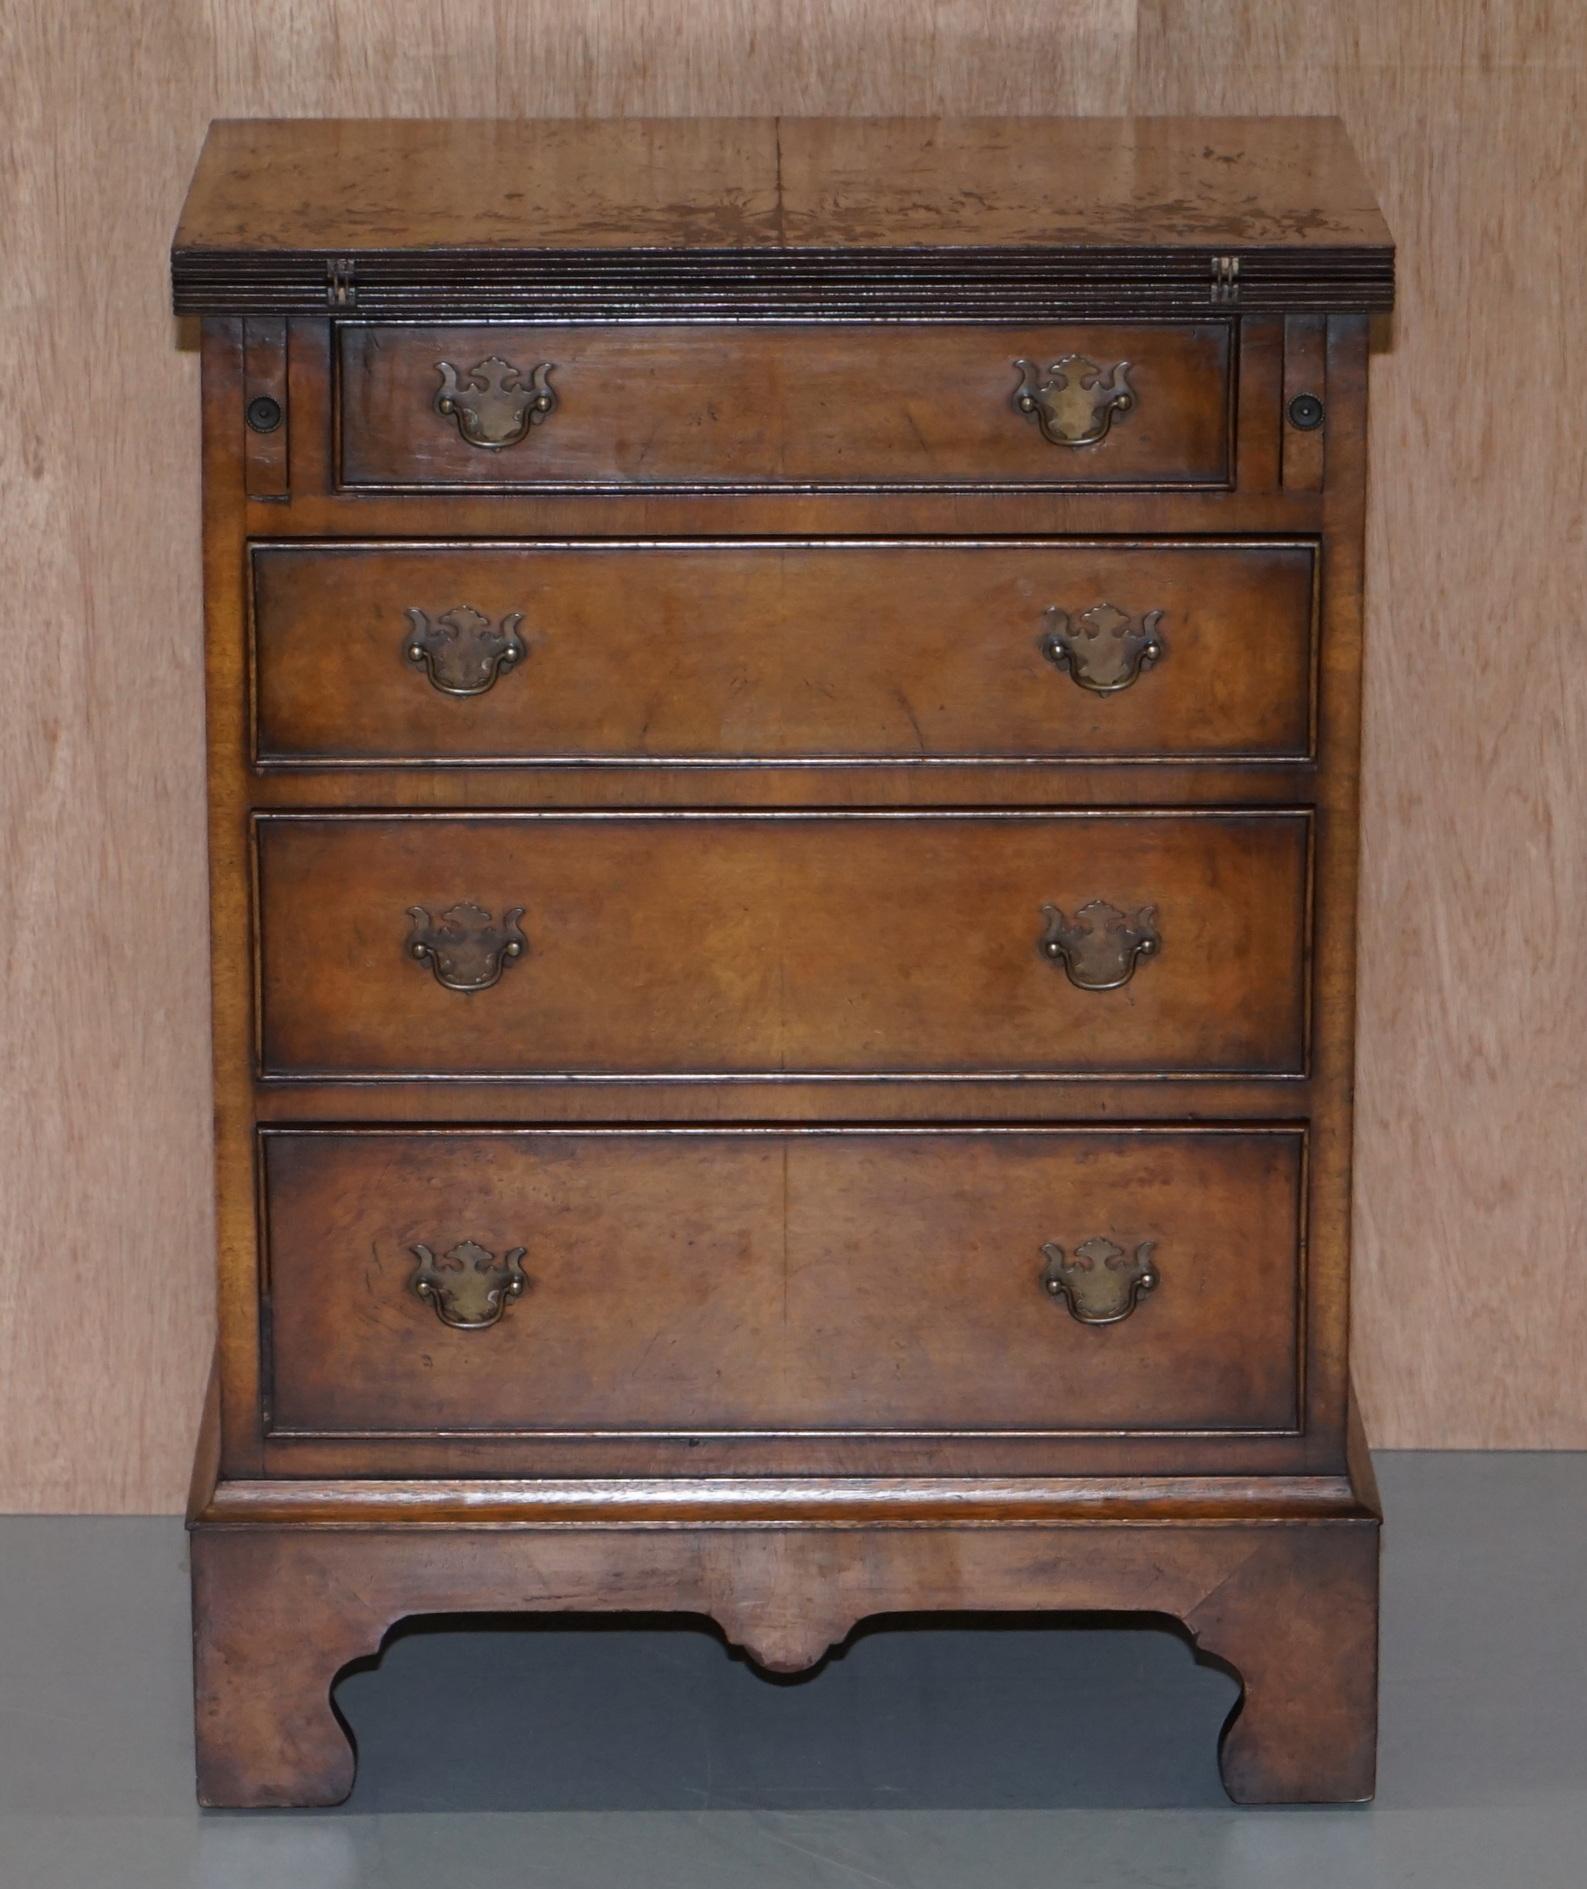 We are delighted to offer for sale this lovely vintage Burr Walnut bachelors chest of drawers with folding butlers serving tray

A very good looking and well made chest of drawers with a folding butlers serving tray, it has mixed timbers, burr